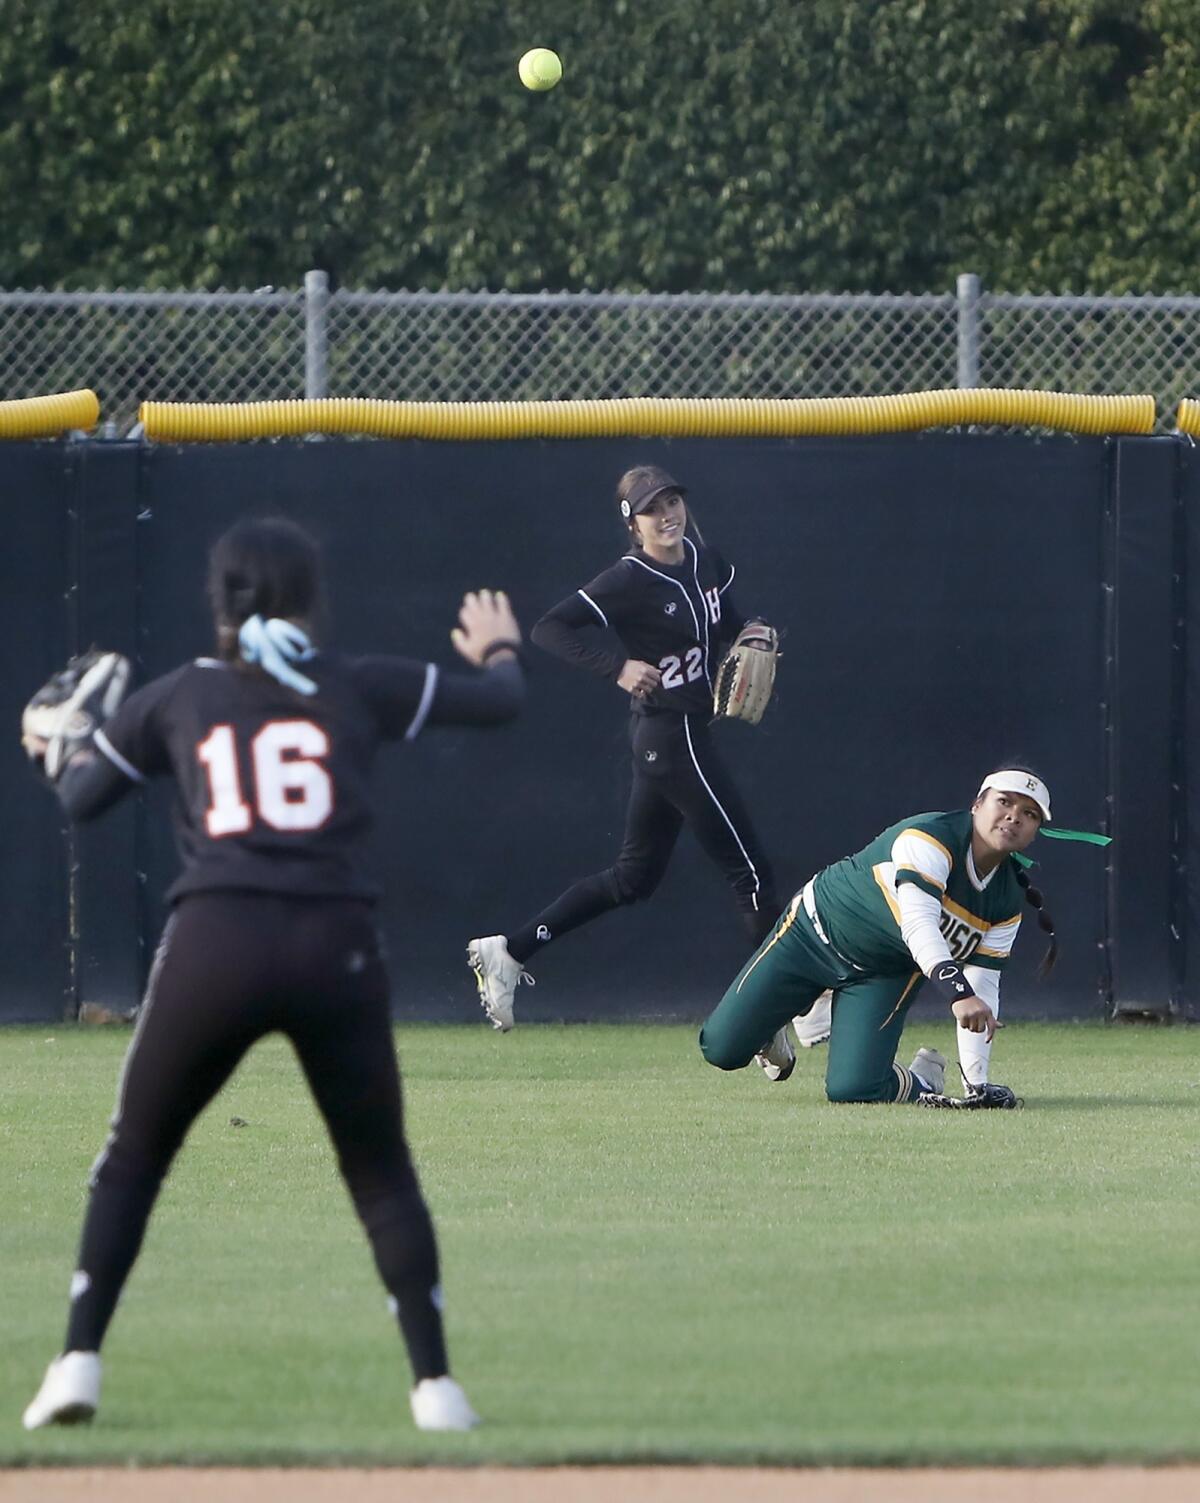 Edison's Jaelyn Operana, right, throws the ball to Huntington Beach's Megan Ryono, left, to start a triple play in the first inning of the Orange County Softball Coaches All-Star Classic on Tuesday. She made a diving catch as Huntington Beach's Jadelyn Allchin, center, looked on.